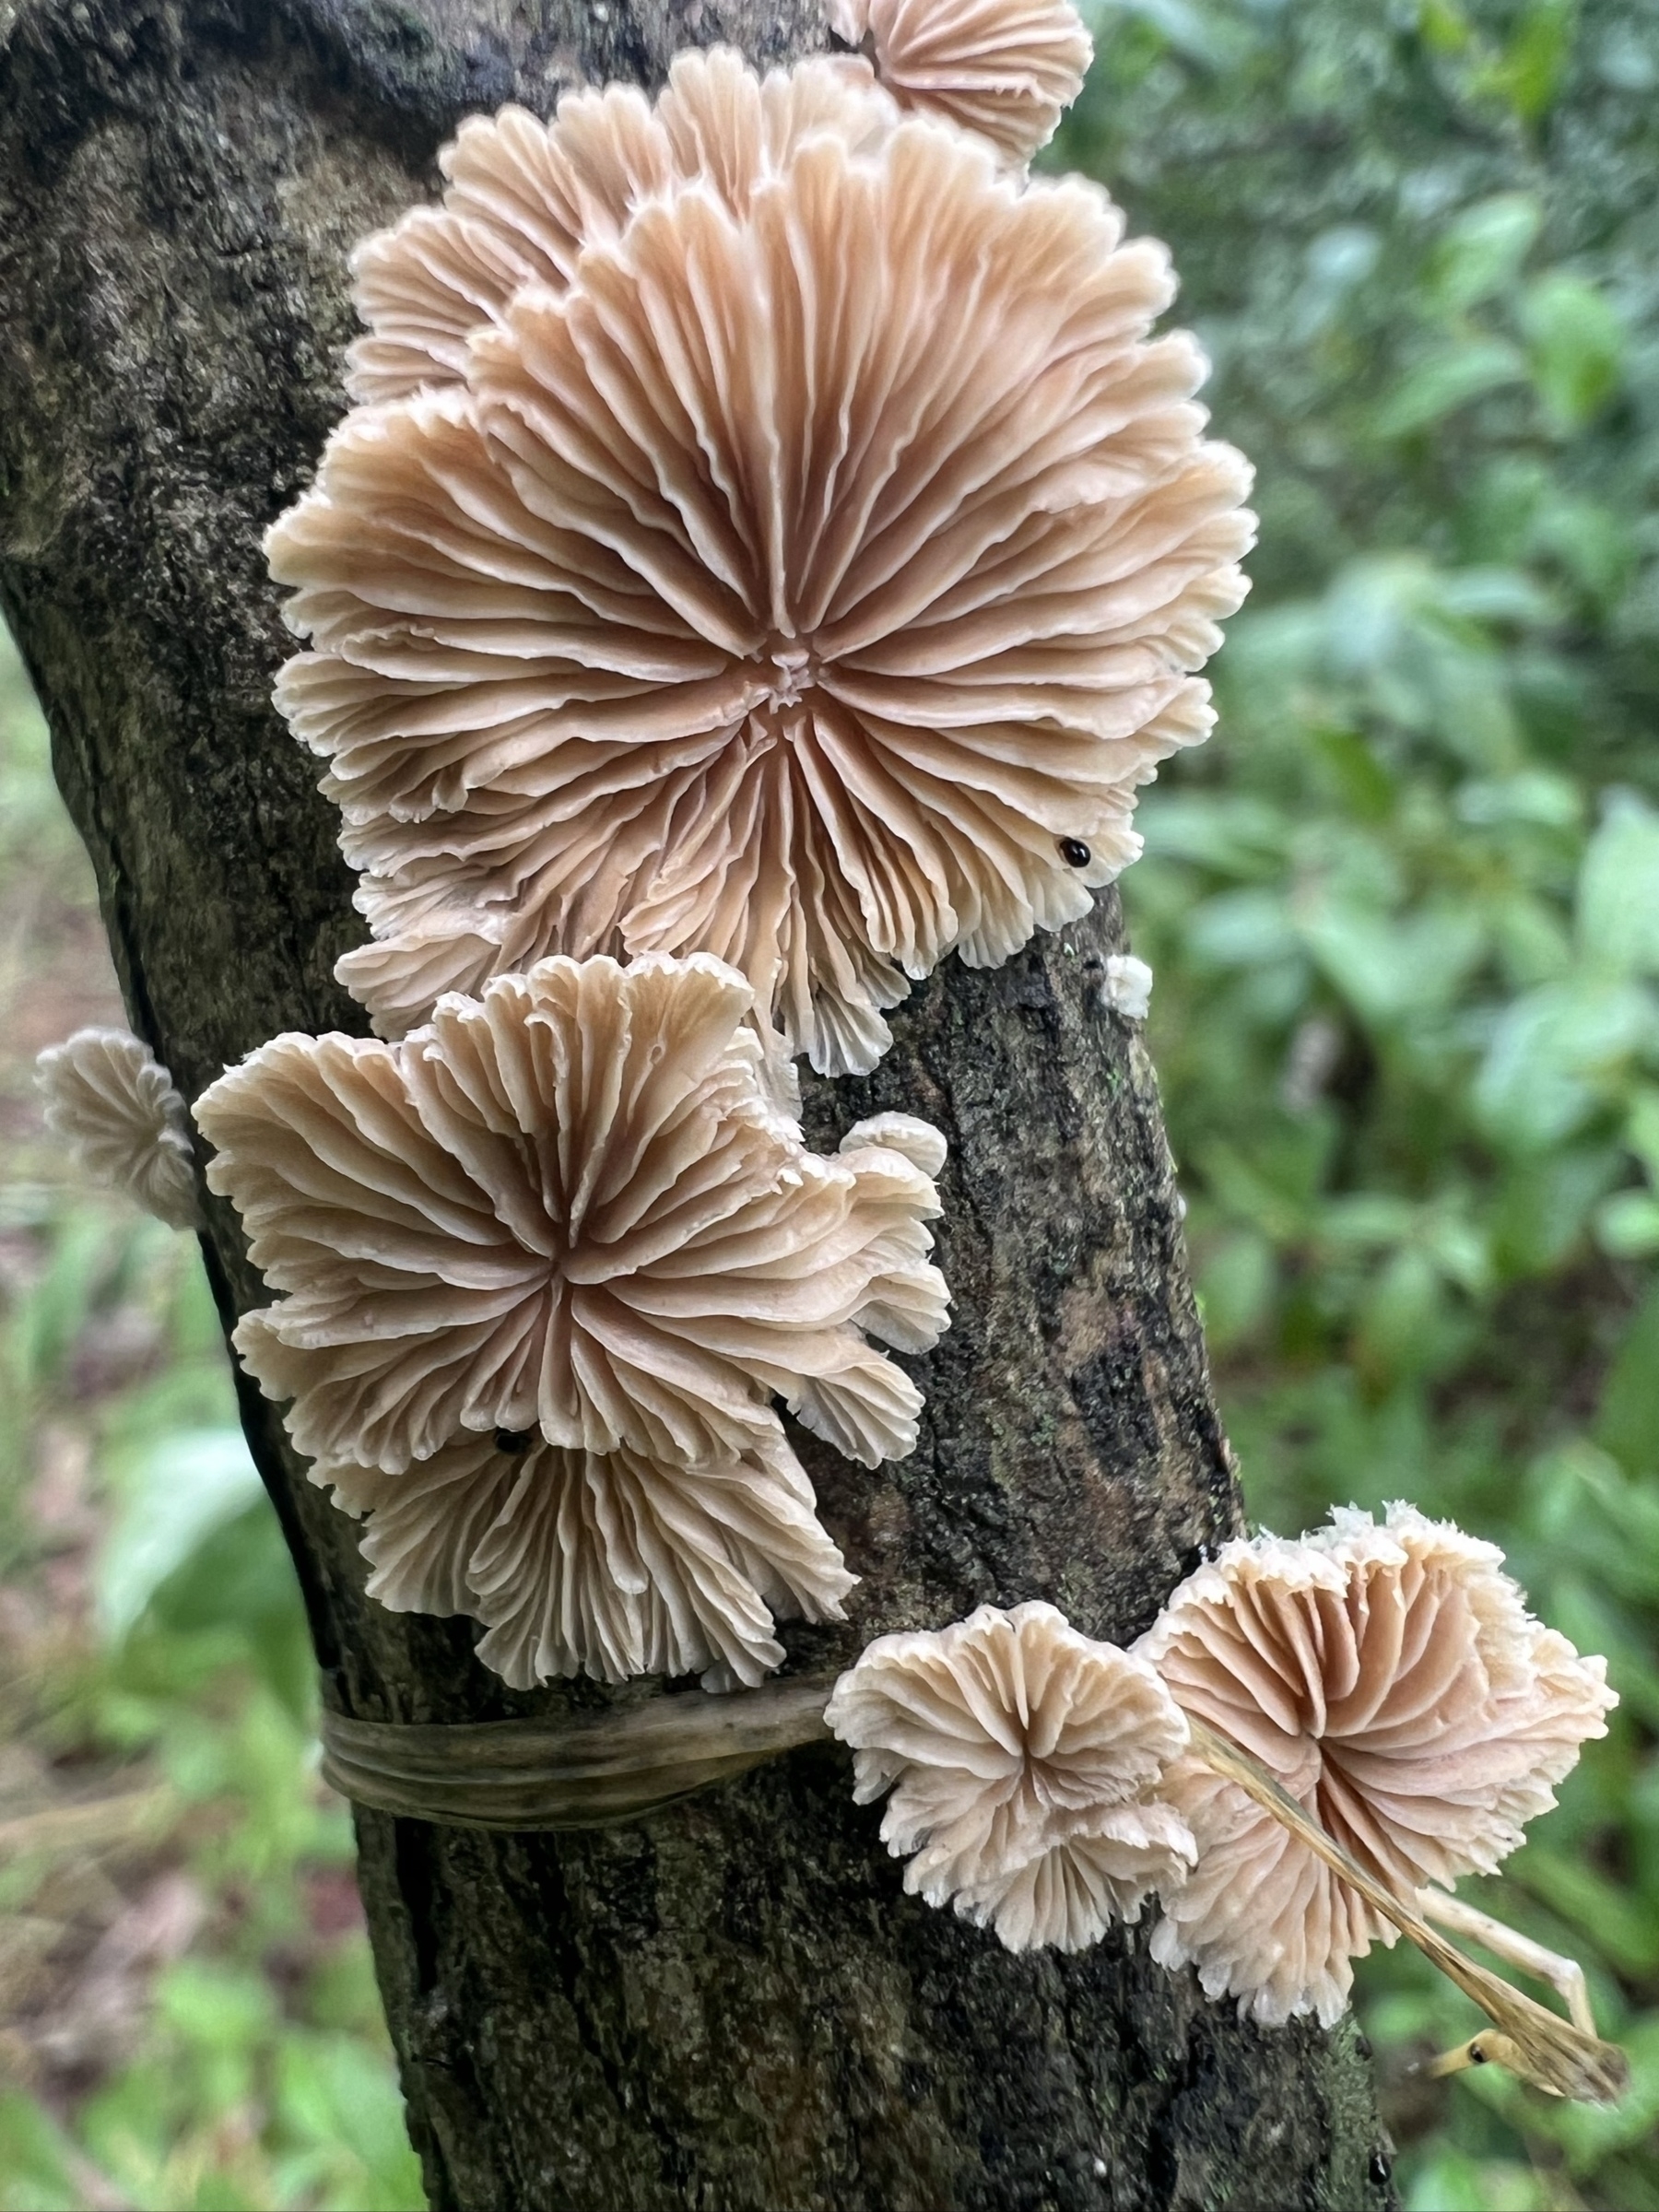 The underside of several very small, cream colored fungi growing on a branch. The underside consists of deeply lined gills